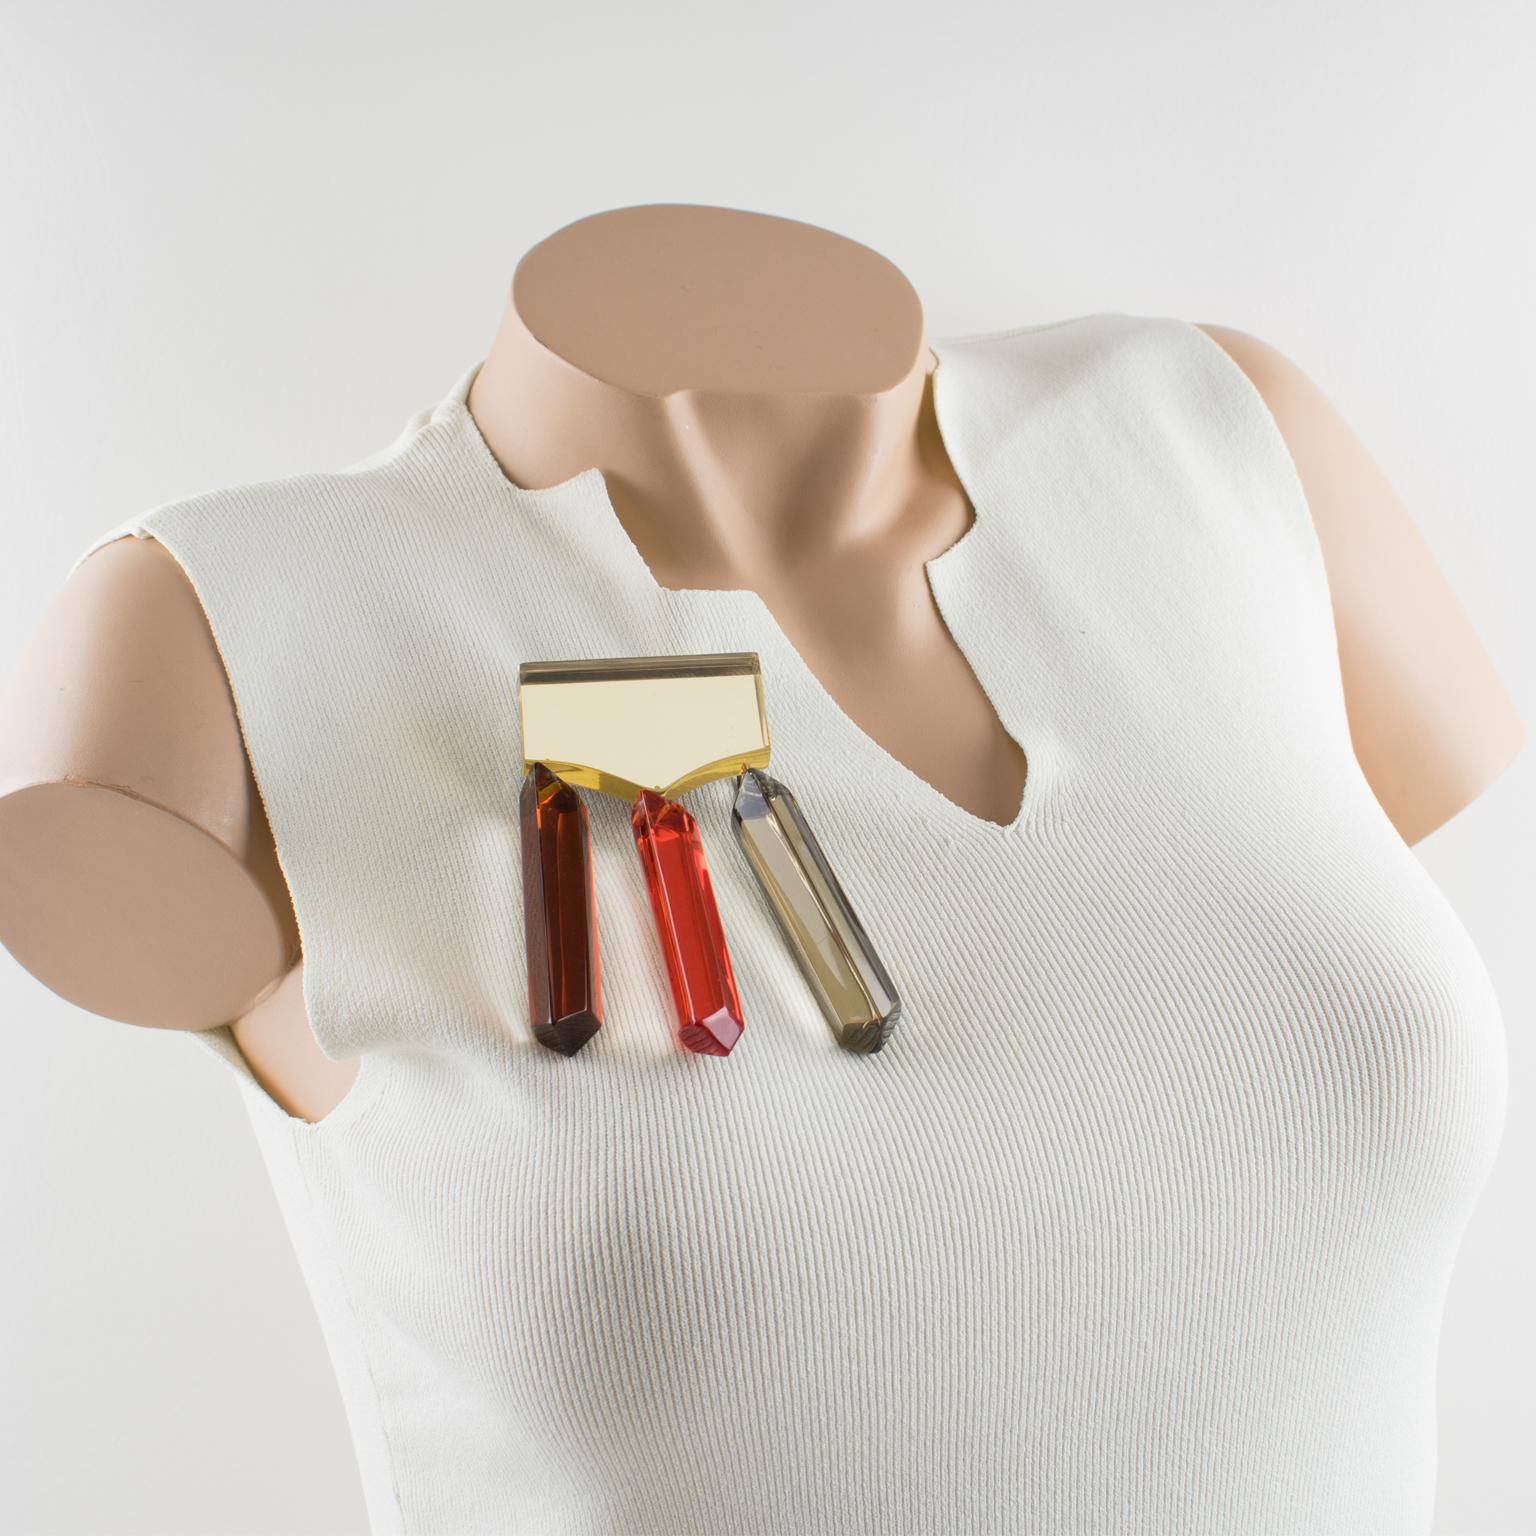 Harriet Bauknight for Kaso designed this stunning oversized Lucite pin brooch. The piece features a geometric and dimensional design with dangling long charms in assorted fall colors of yellow champagne, gold honey, burnt orange, and toffee brown. A